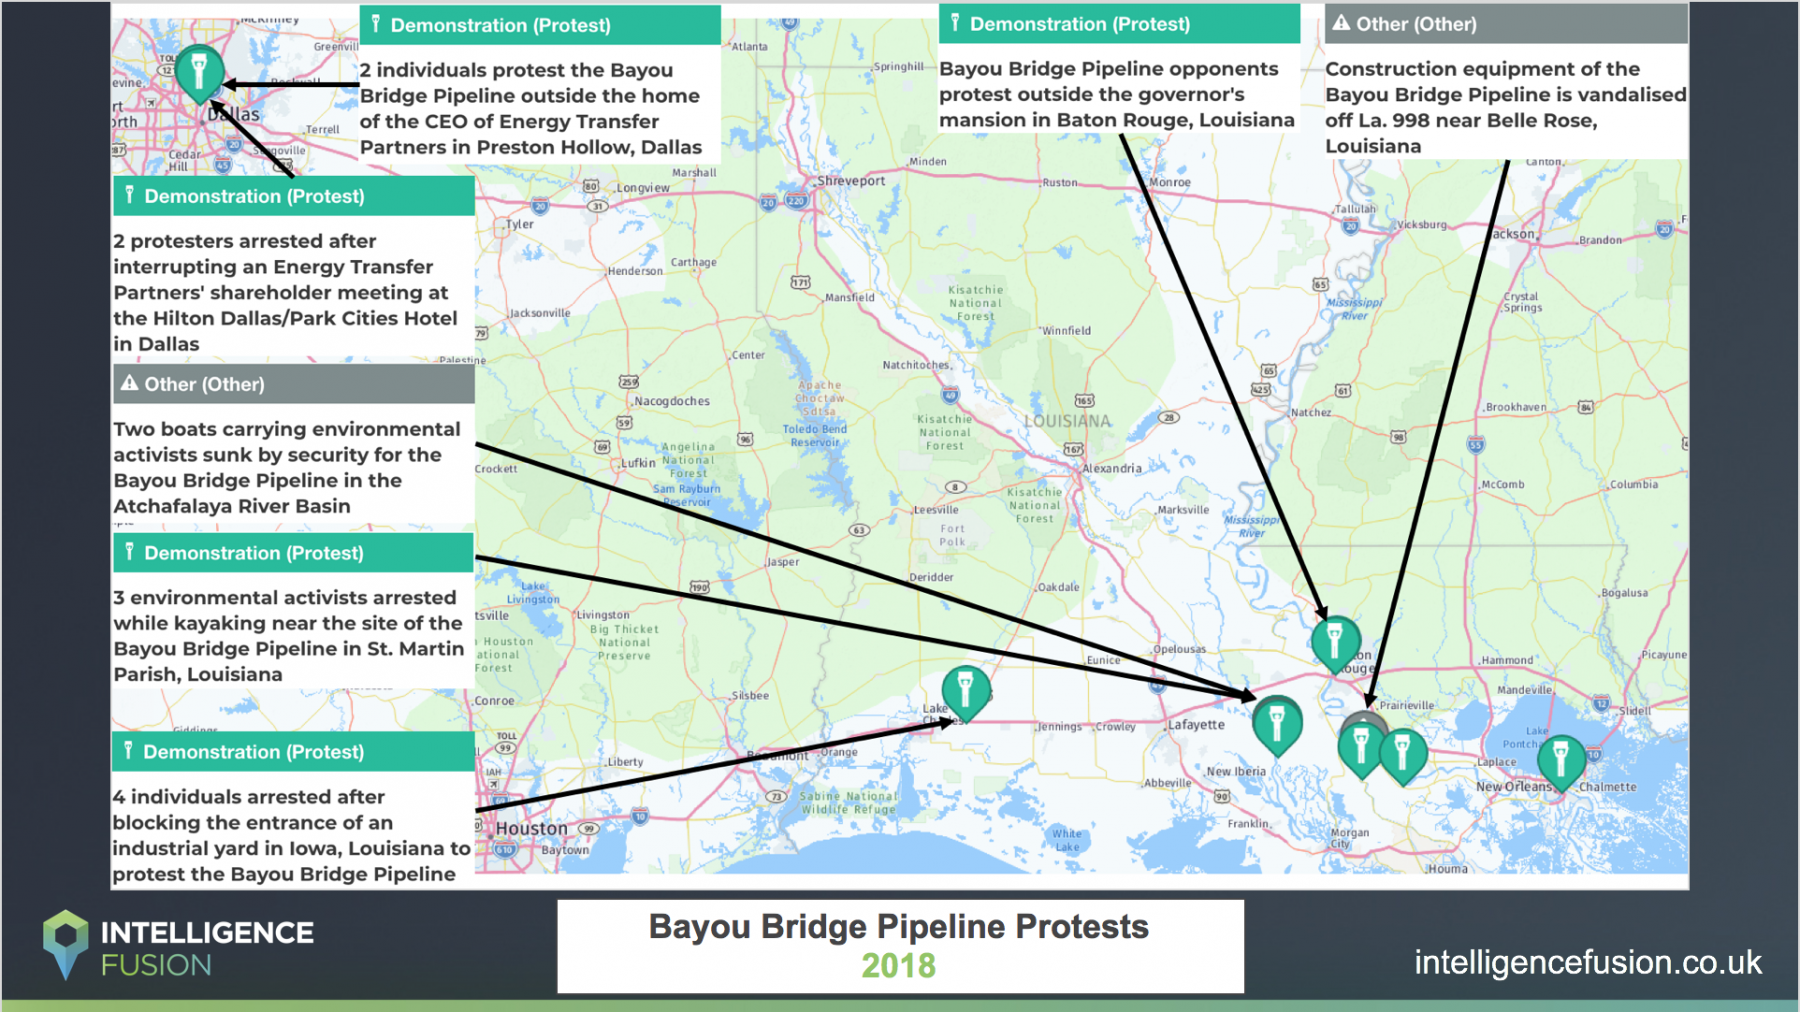 A PICINTSUM that outlines the demonstrations and protests at Bayou Bridge in Louisiana throughout 2018